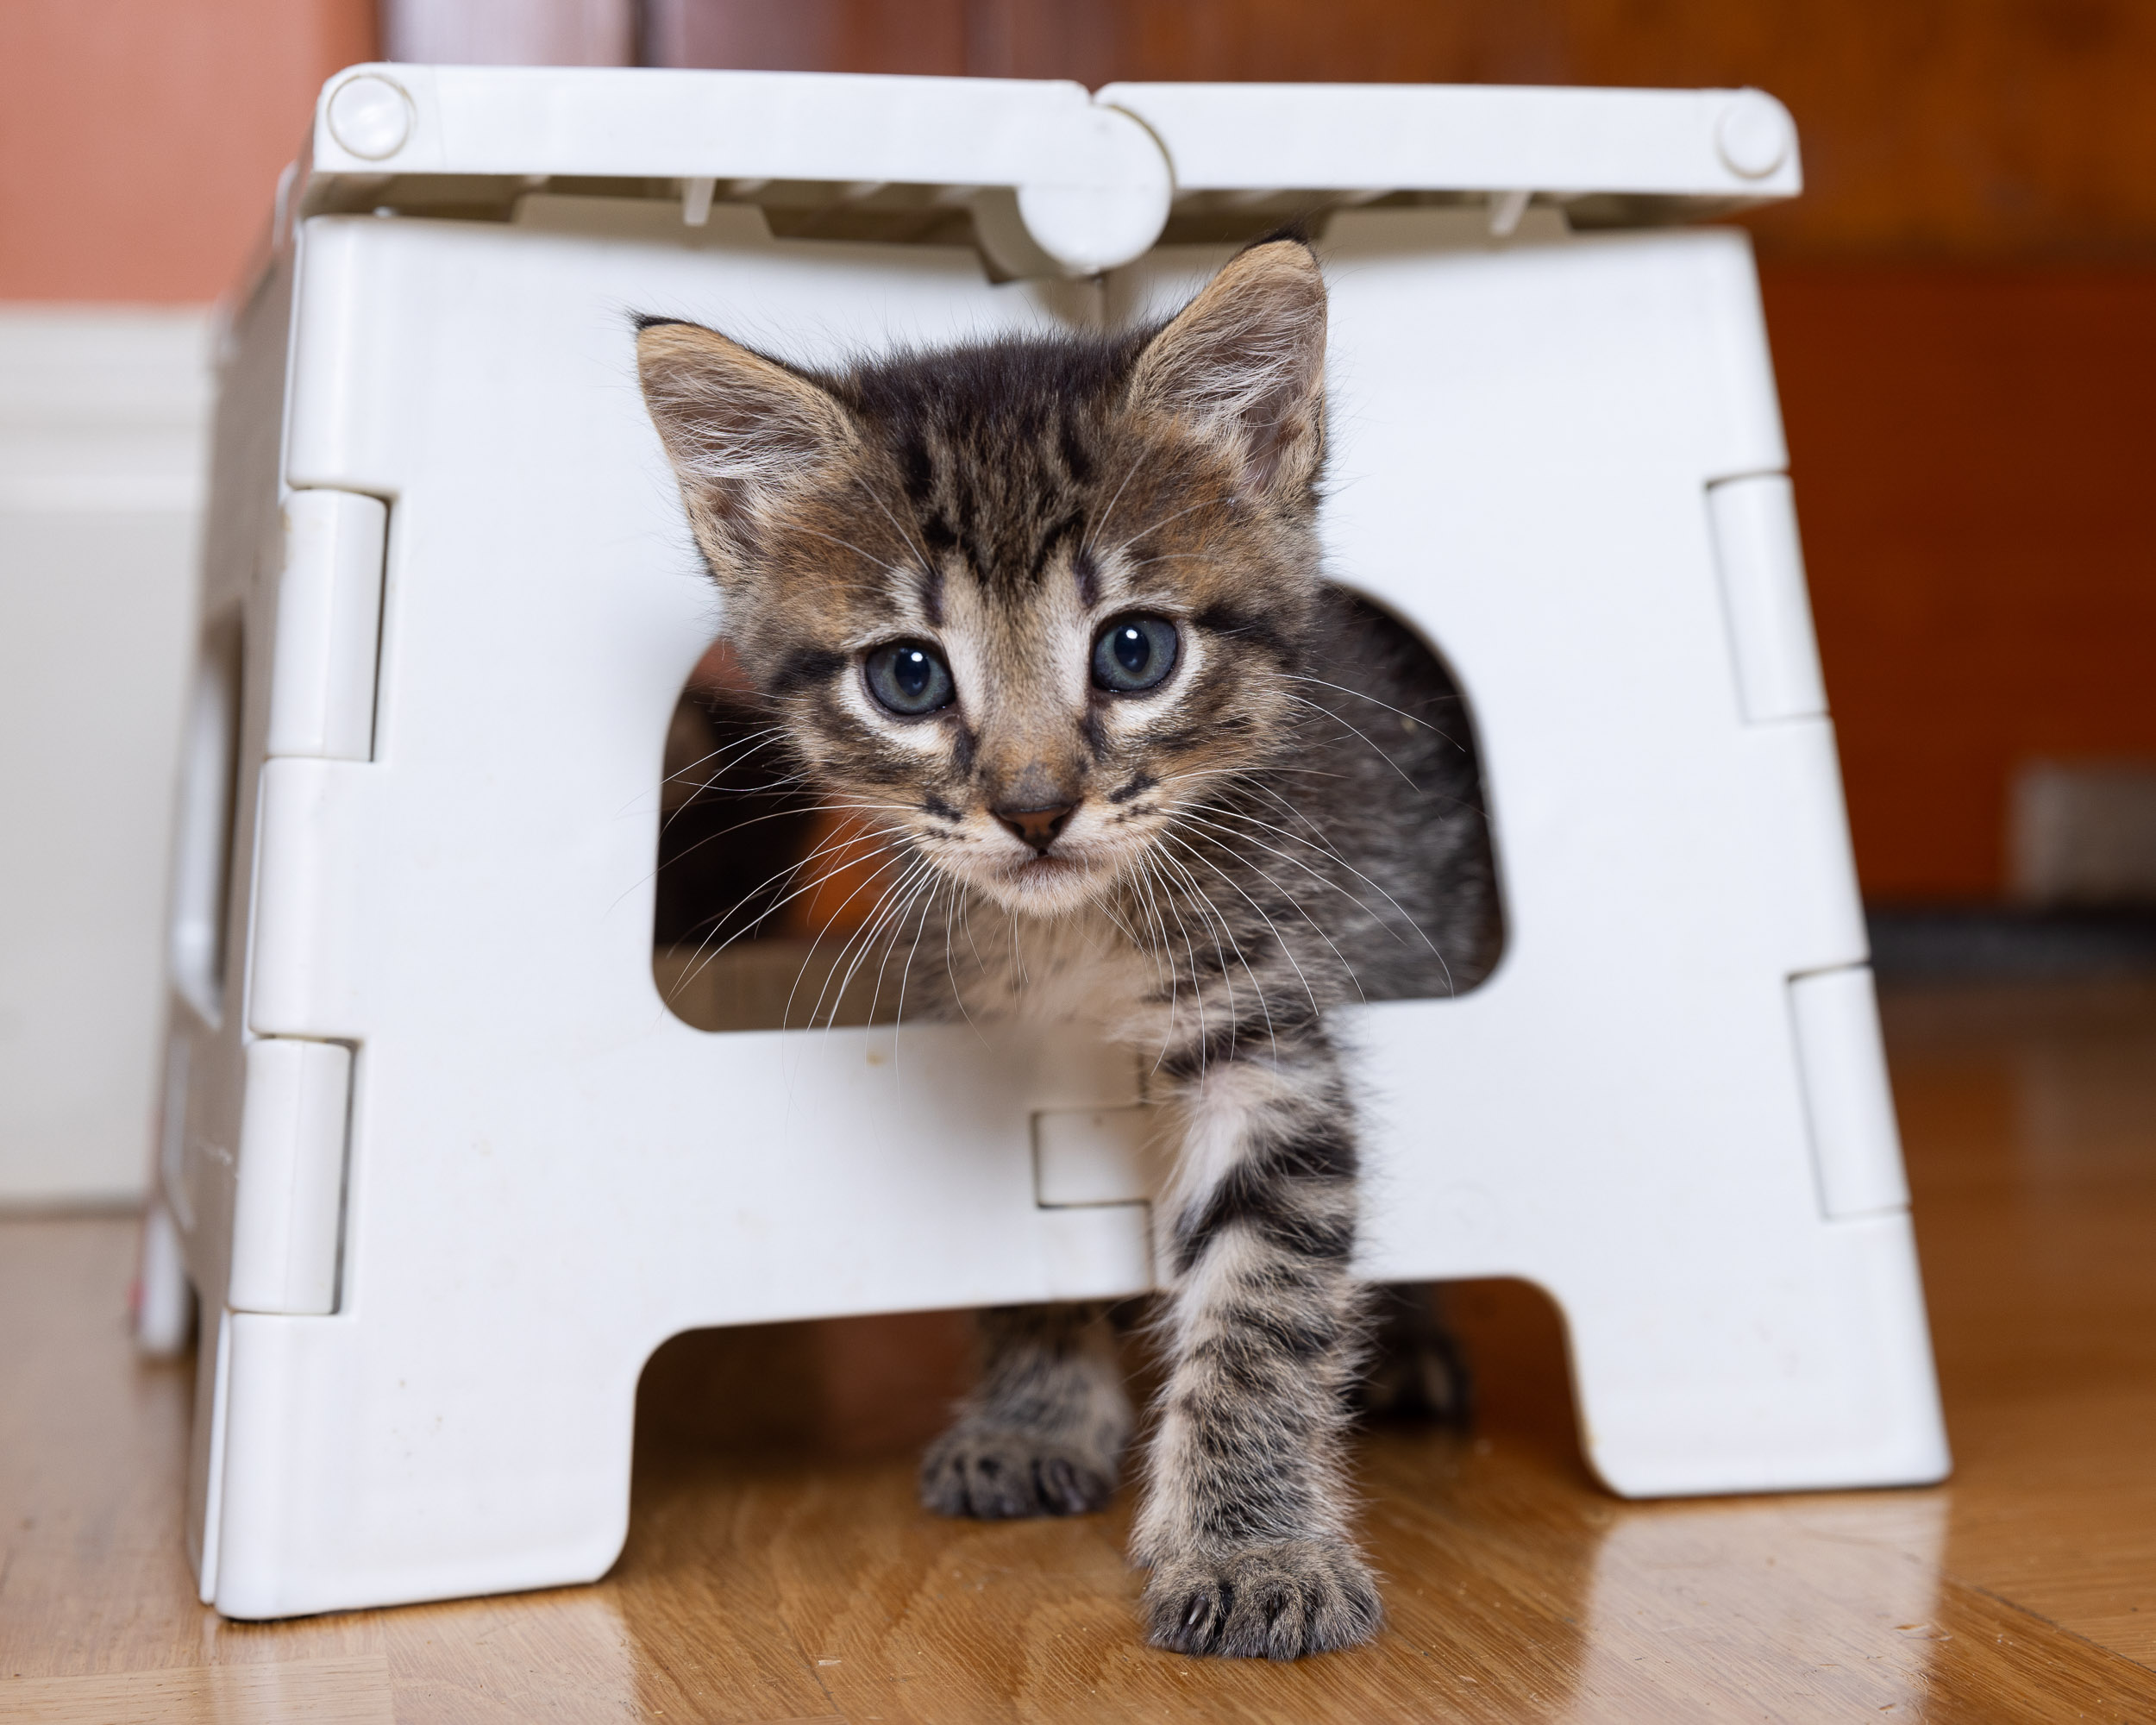 Cat Photography | Kitten Under Stool by Mark Rogers